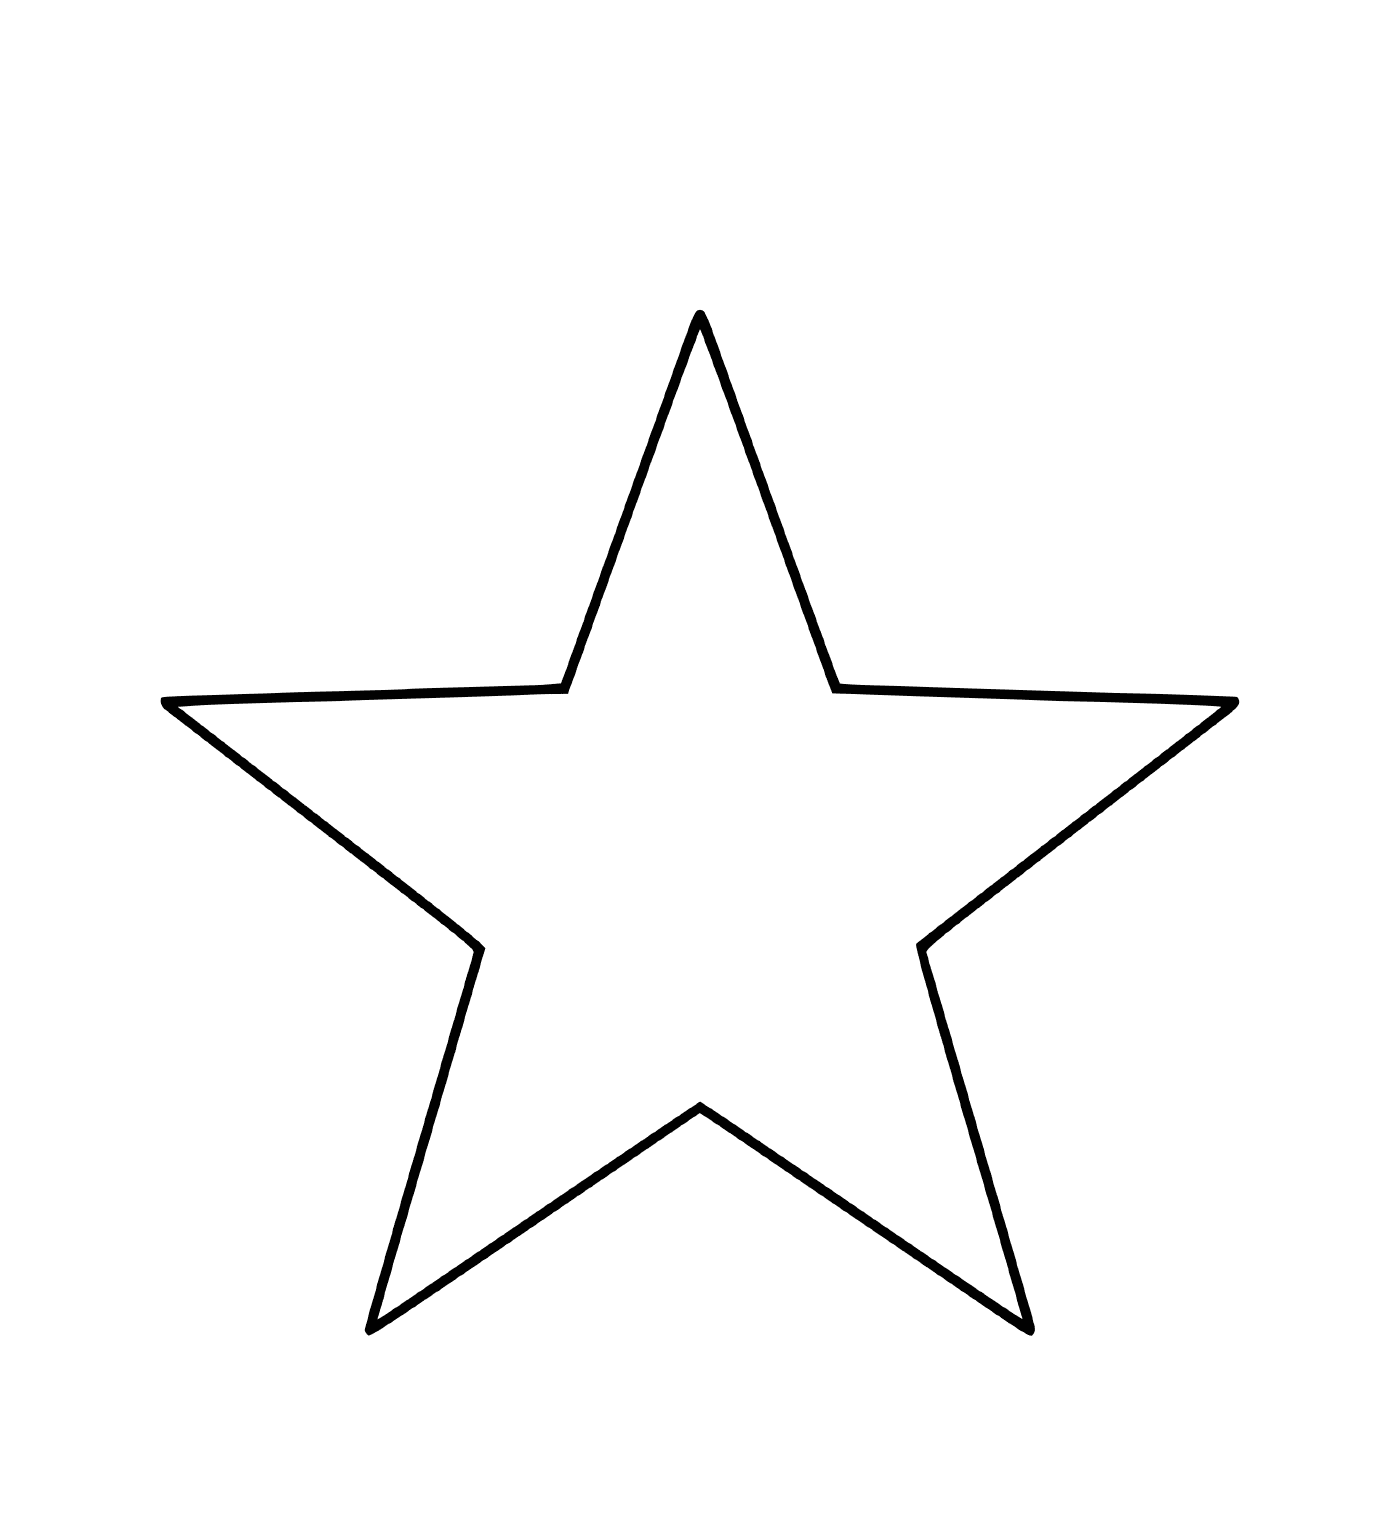  A five-pointed star ready to be cut 